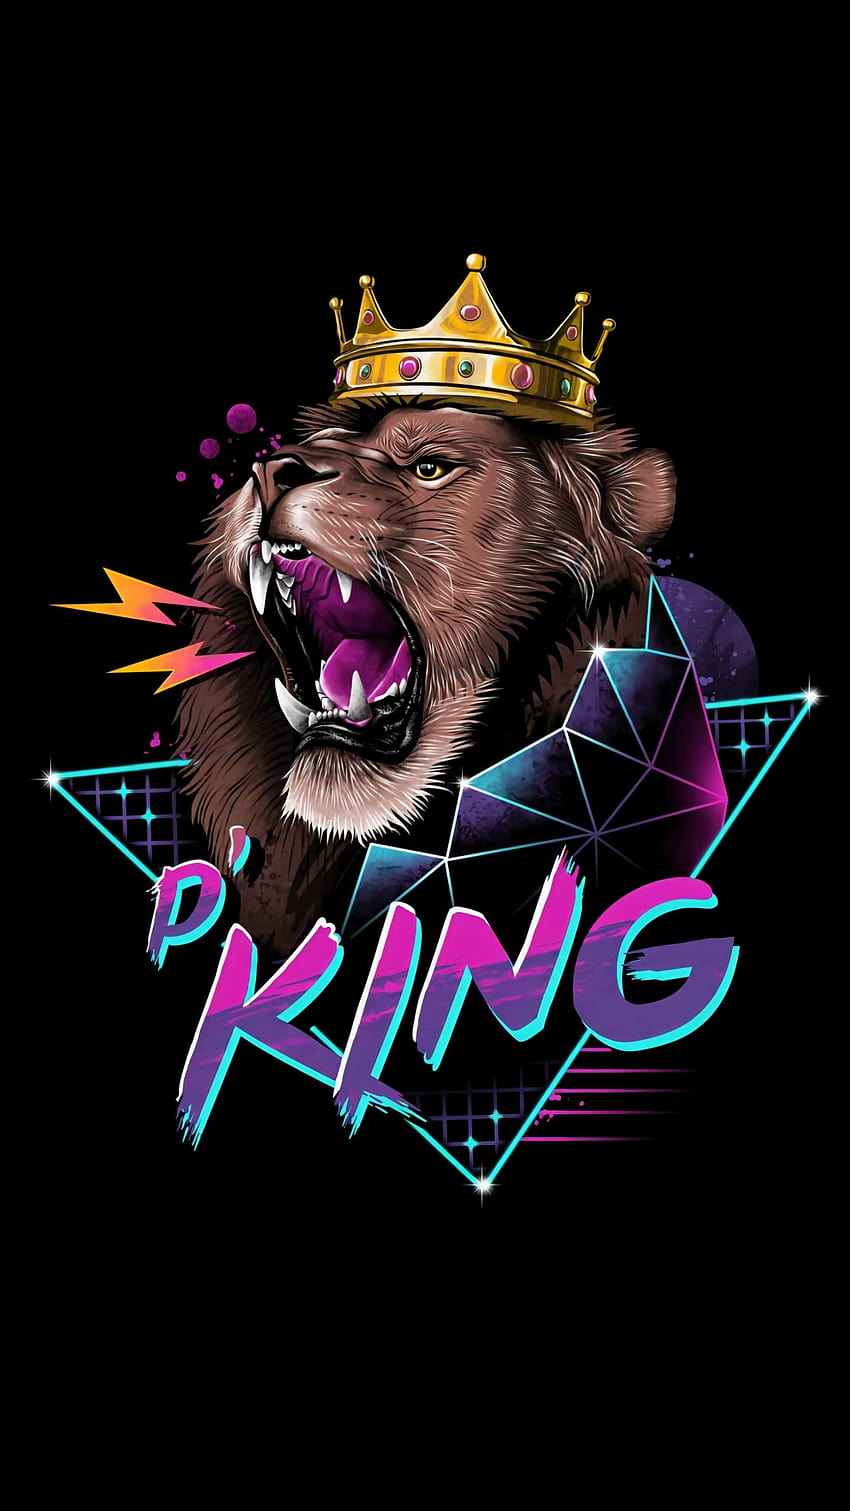 King Lion With Crown Neon Light Amoled, mobile amoled neon HD phone wallpaper